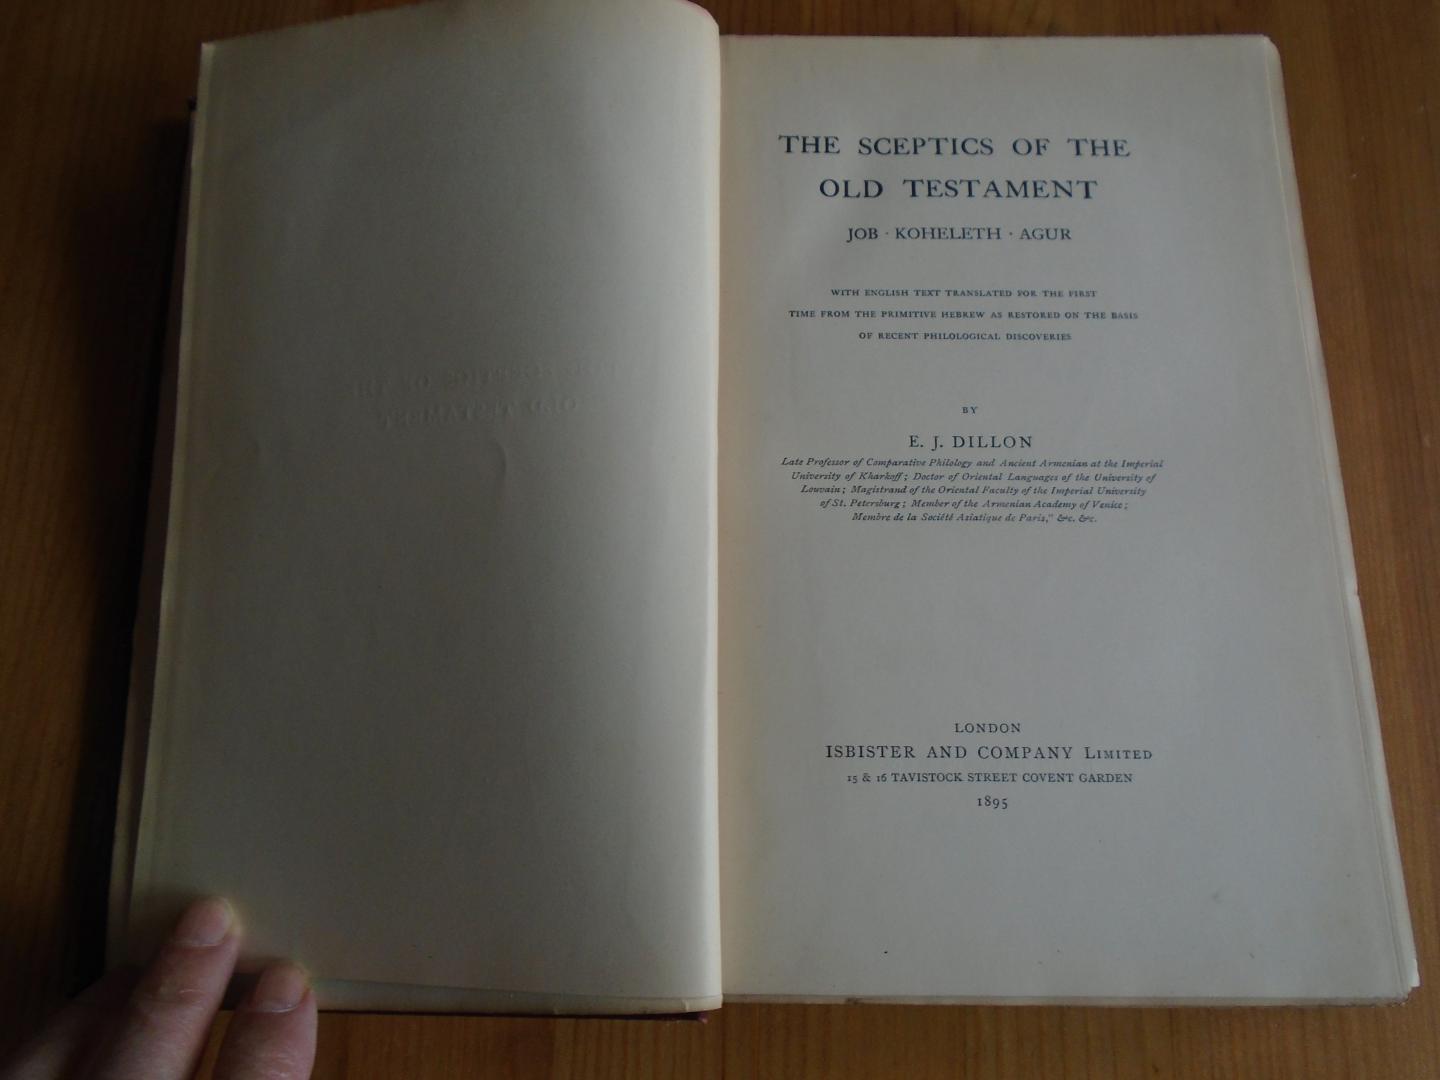 Dillon, E.J. - The Sceptics of the Old Testament: Job, Koheleth, Agur. With English text translated for the first time from the primitive Hebrew as restored on the basis of recent philological discoveries